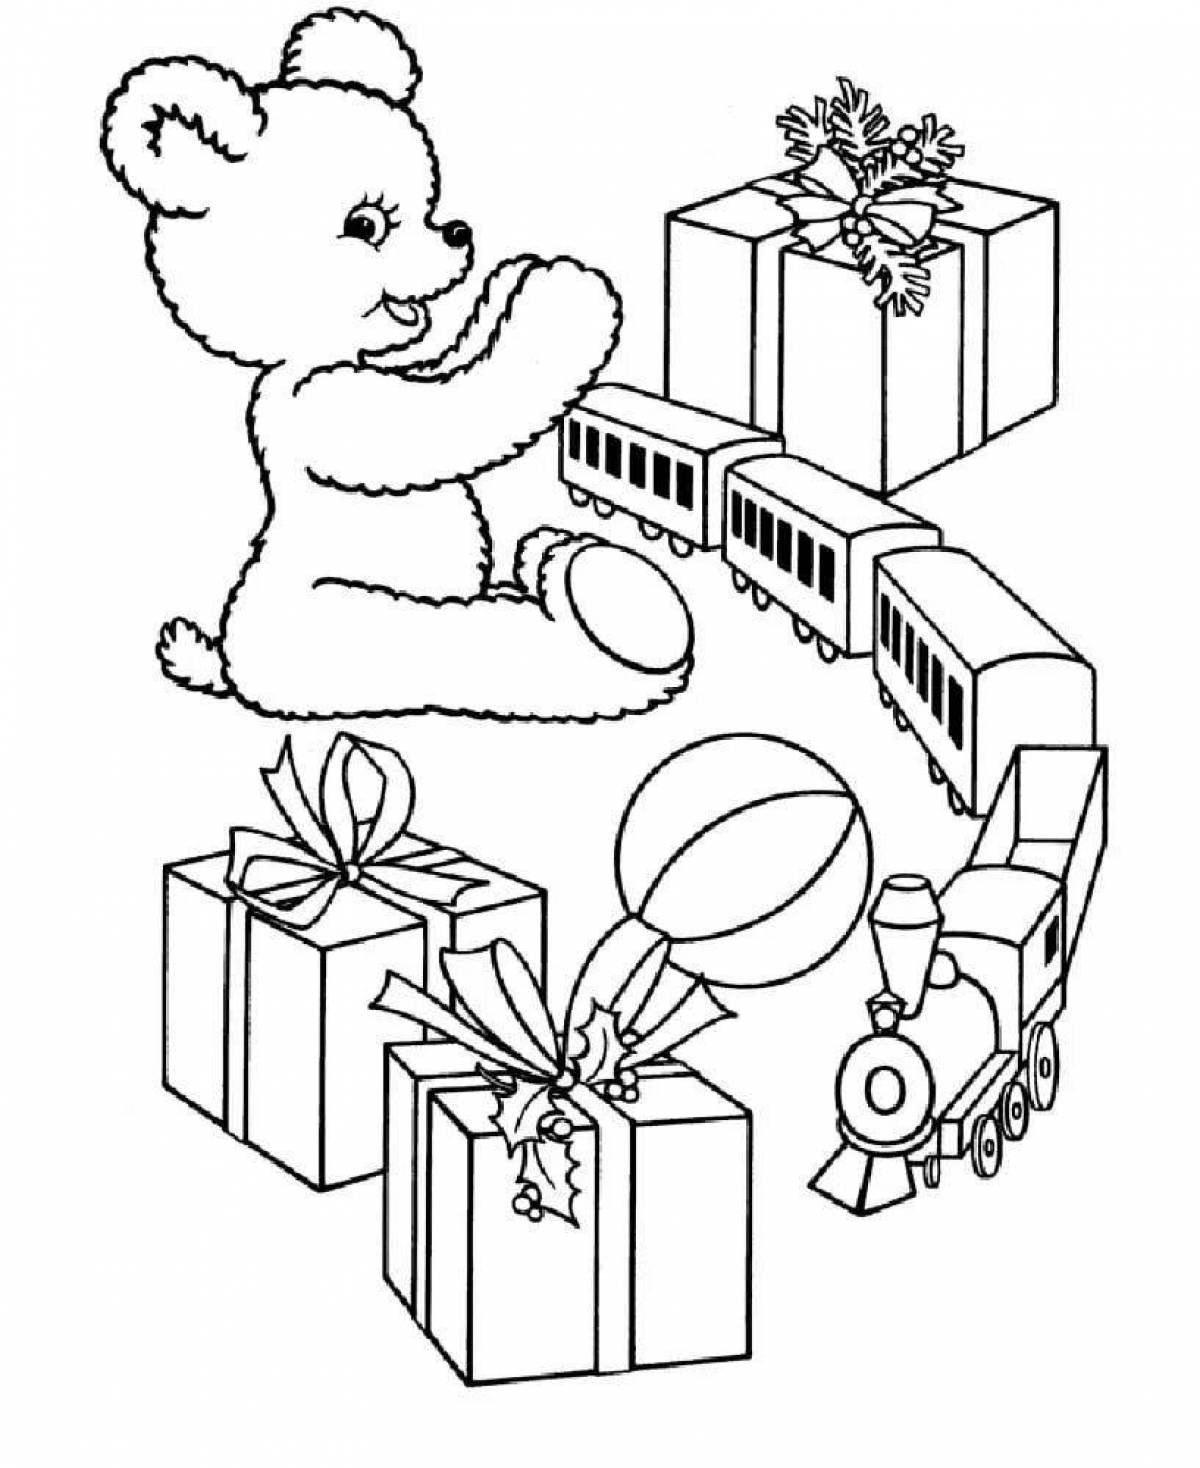 Outstanding gift coloring book for kids